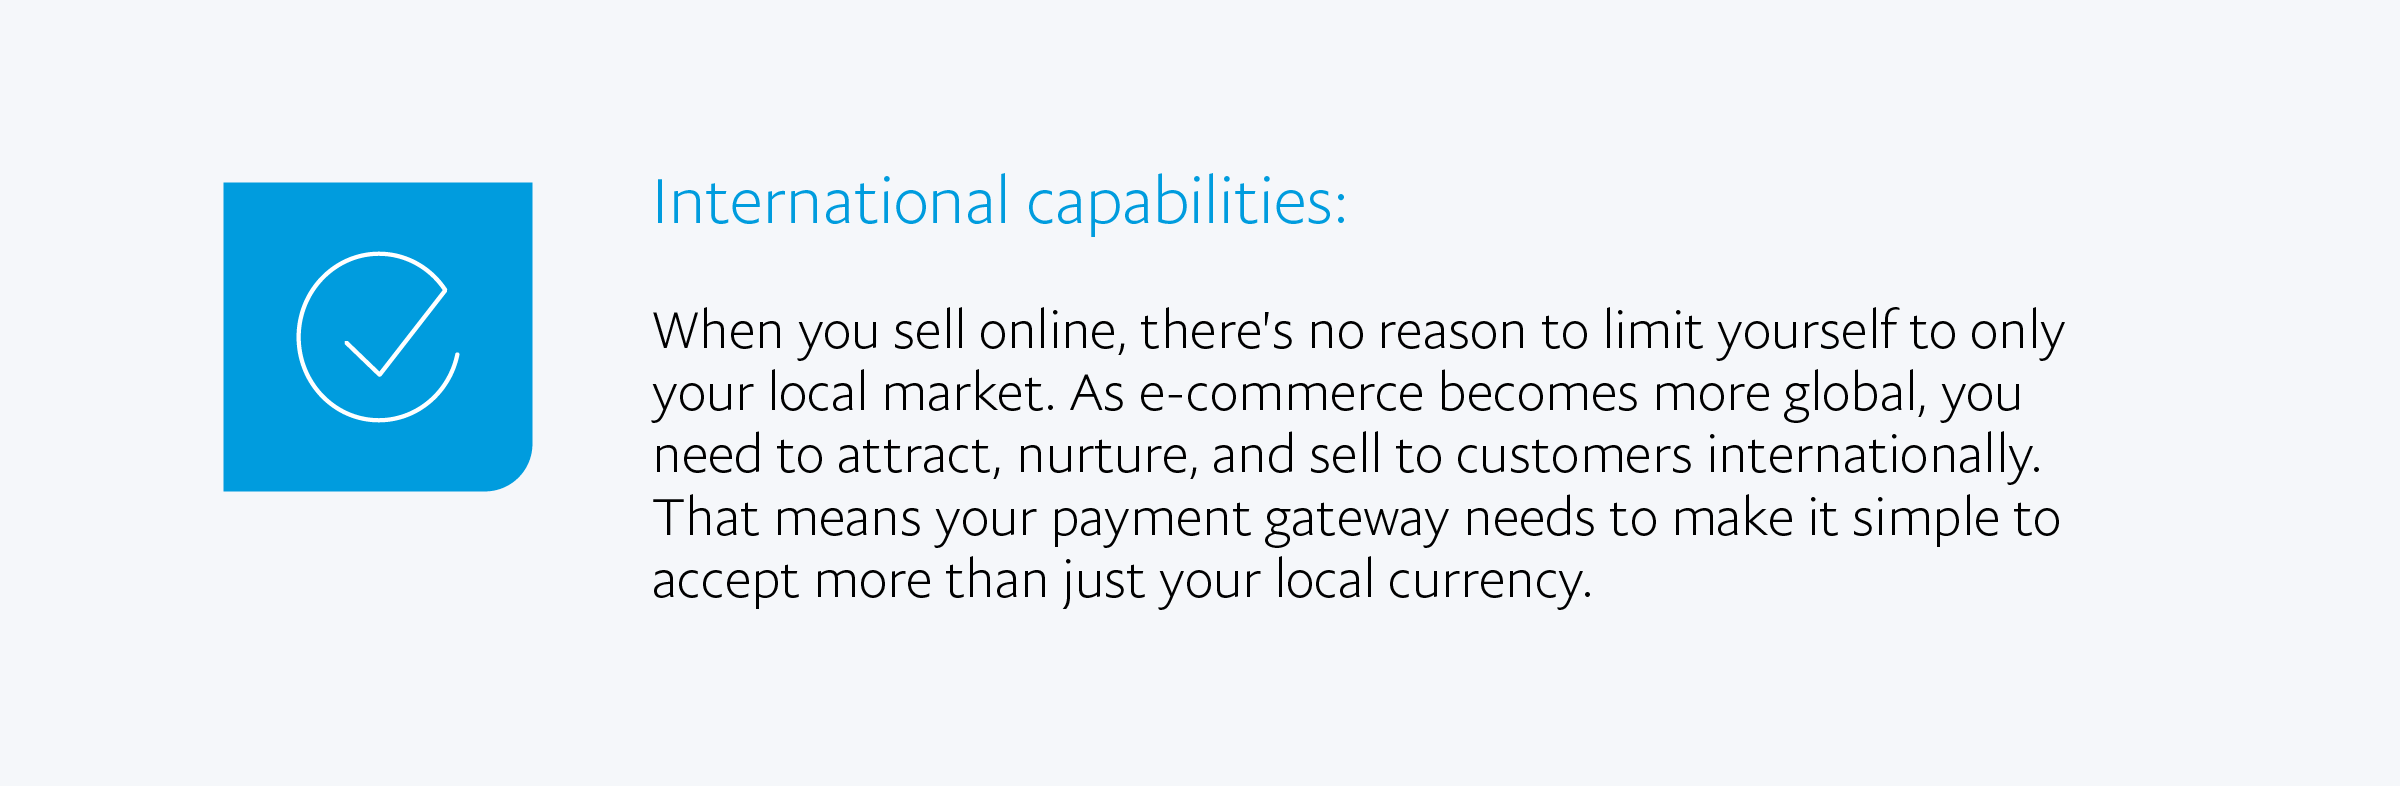 International capabilities: When you sell online, there's no reason to limit yourself to only your local market. As e-commerce becomes more global, you need to attract, nurture, and sell to customers internationally. That means your payment gateway needs to make it simple to accept more than just your local currency.